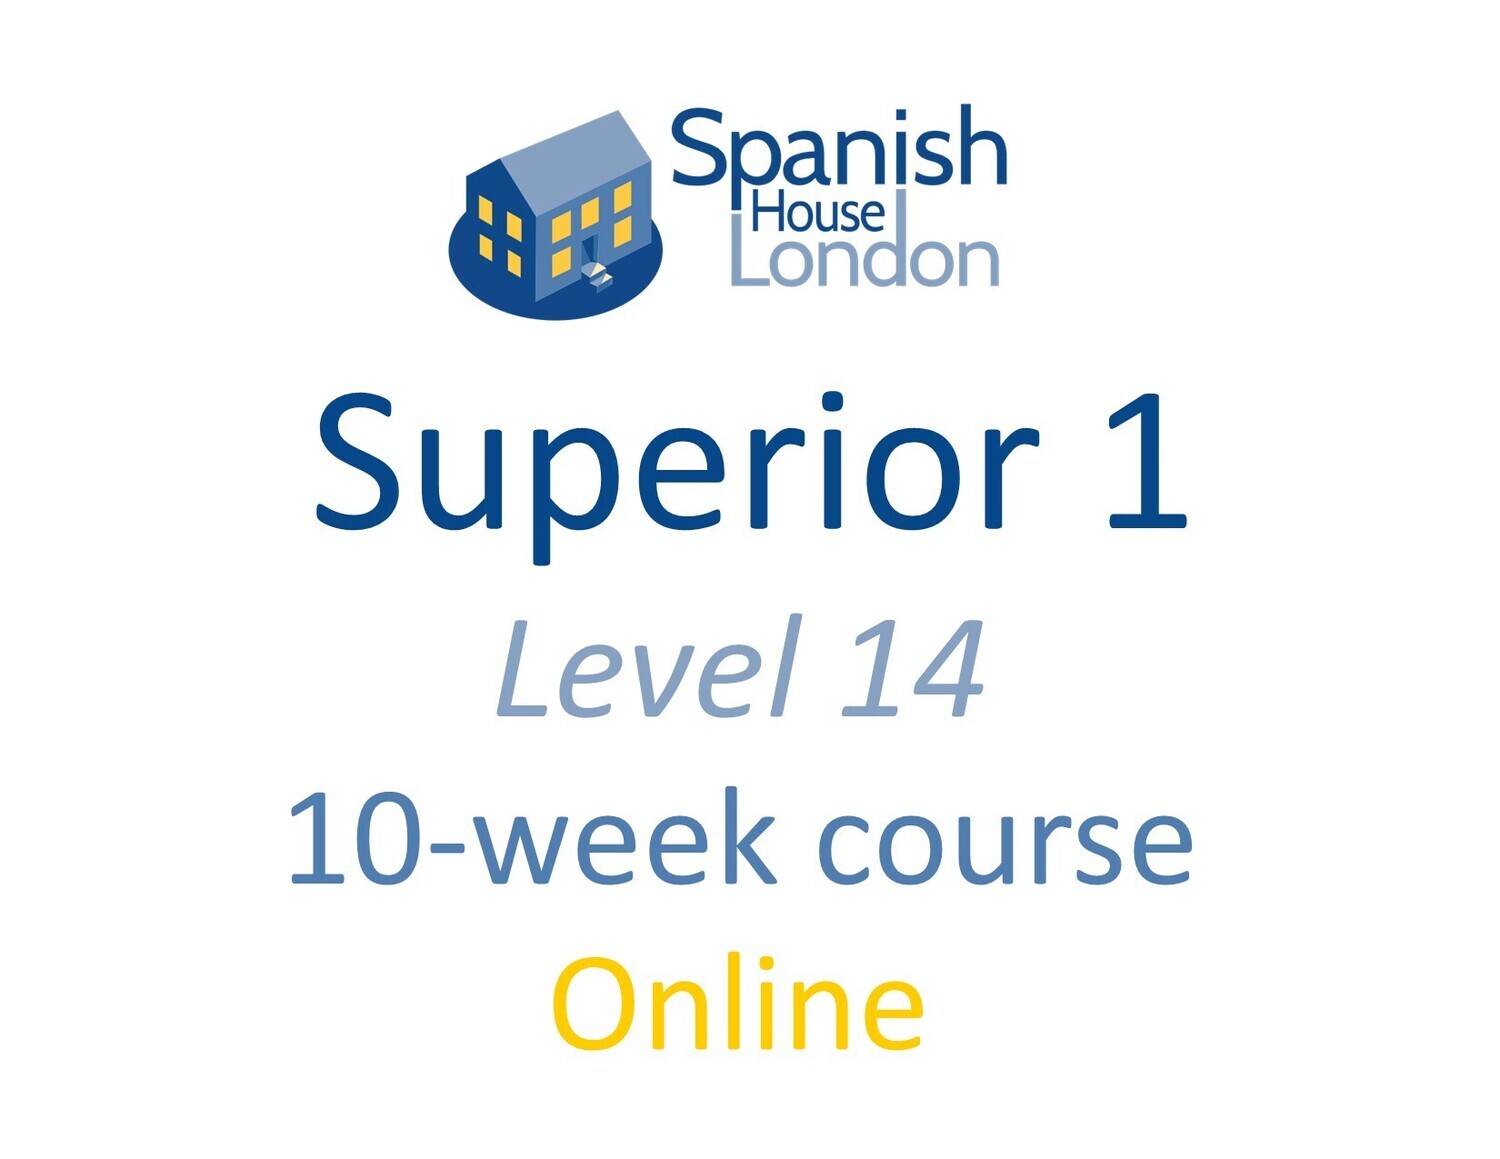 Superior 1 Course starting on 20th March at 7.30pm Online